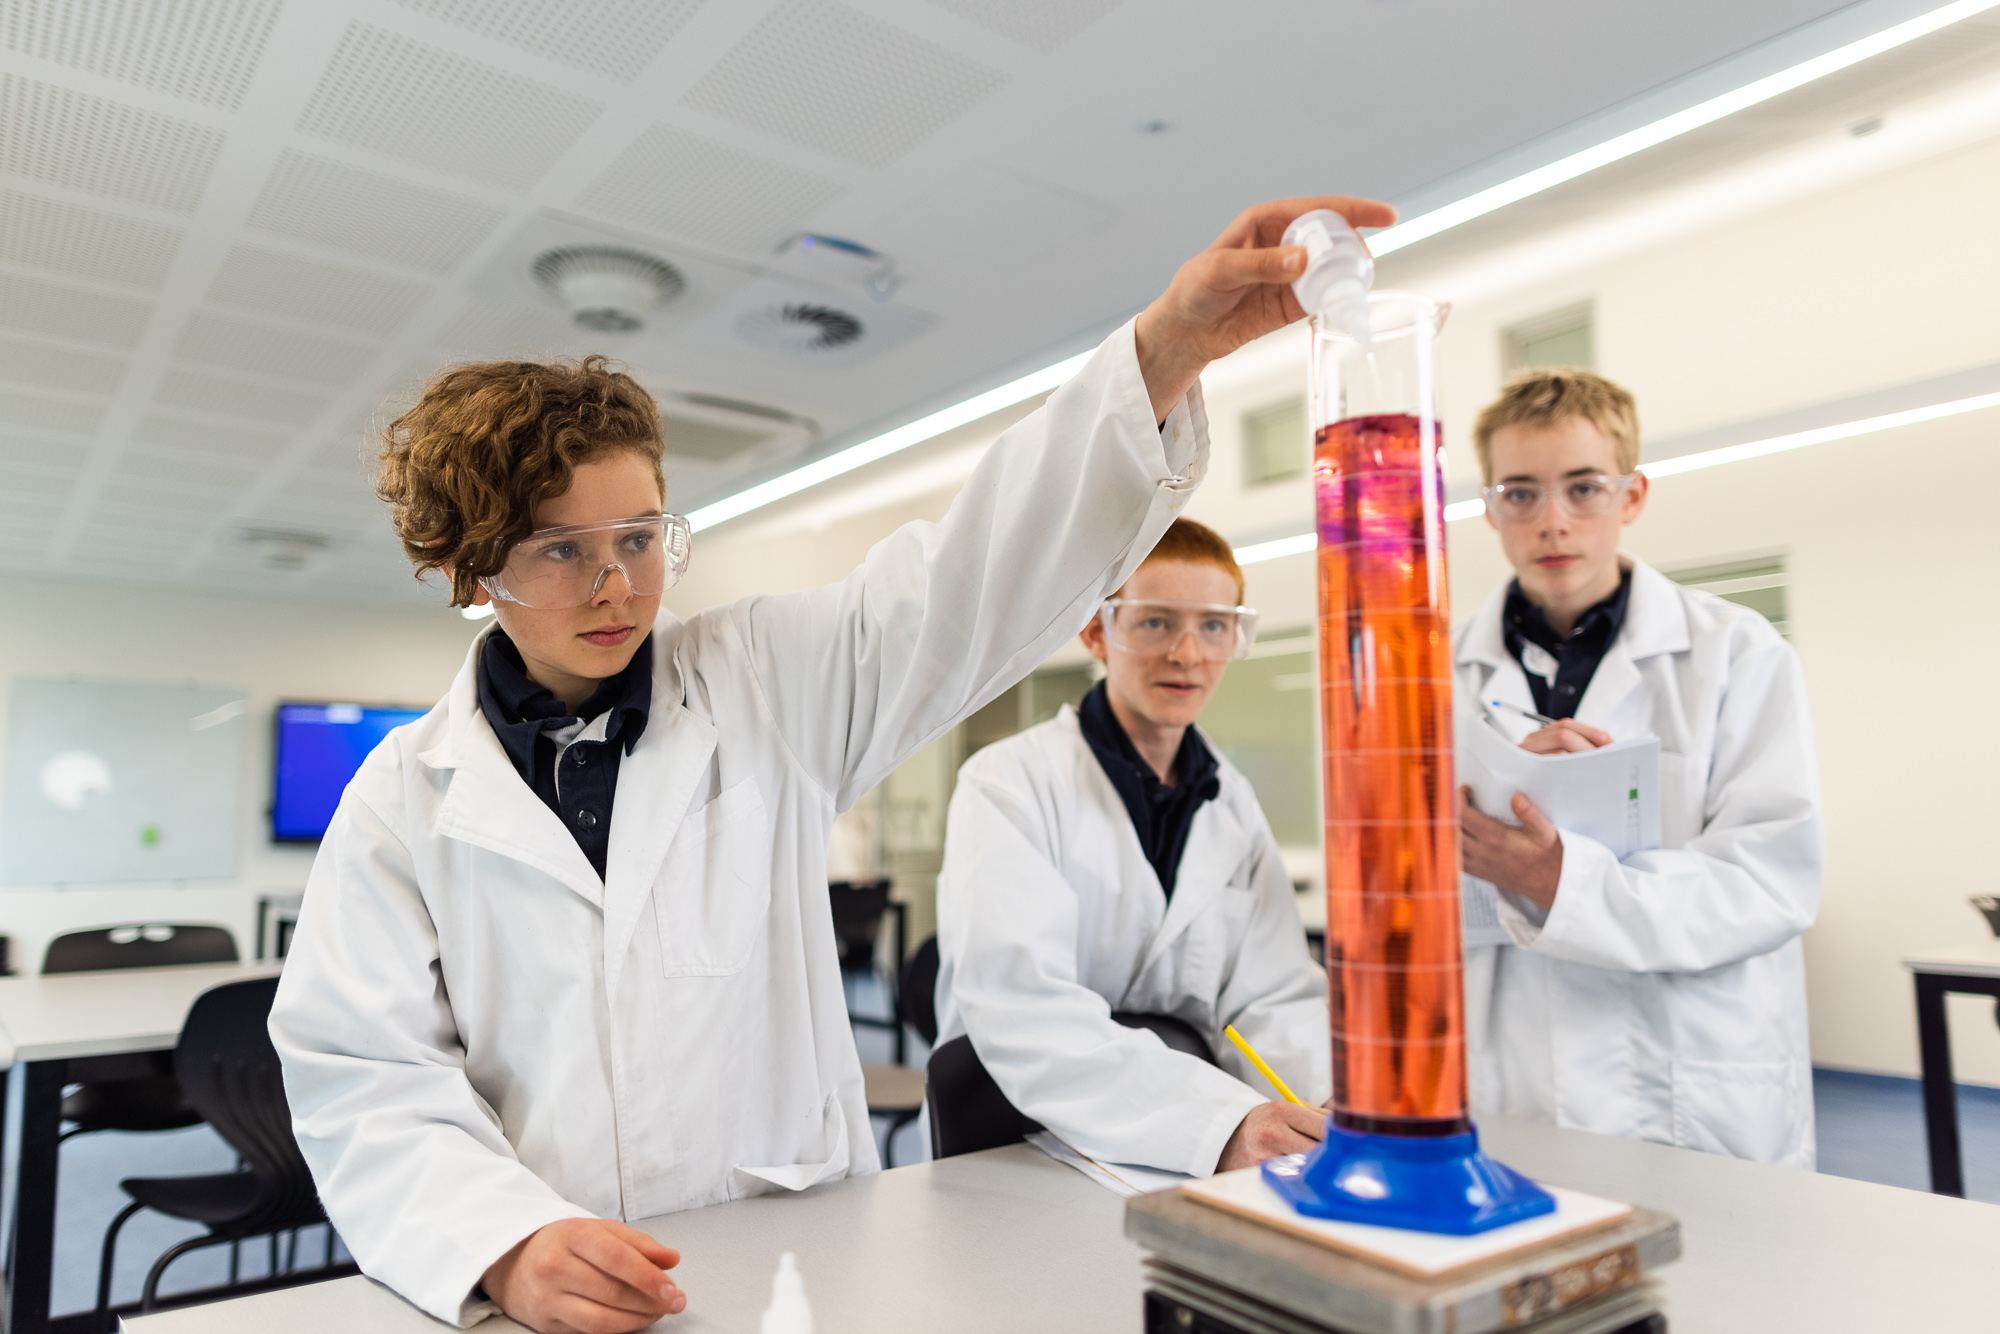 High school students conducting a science experiment